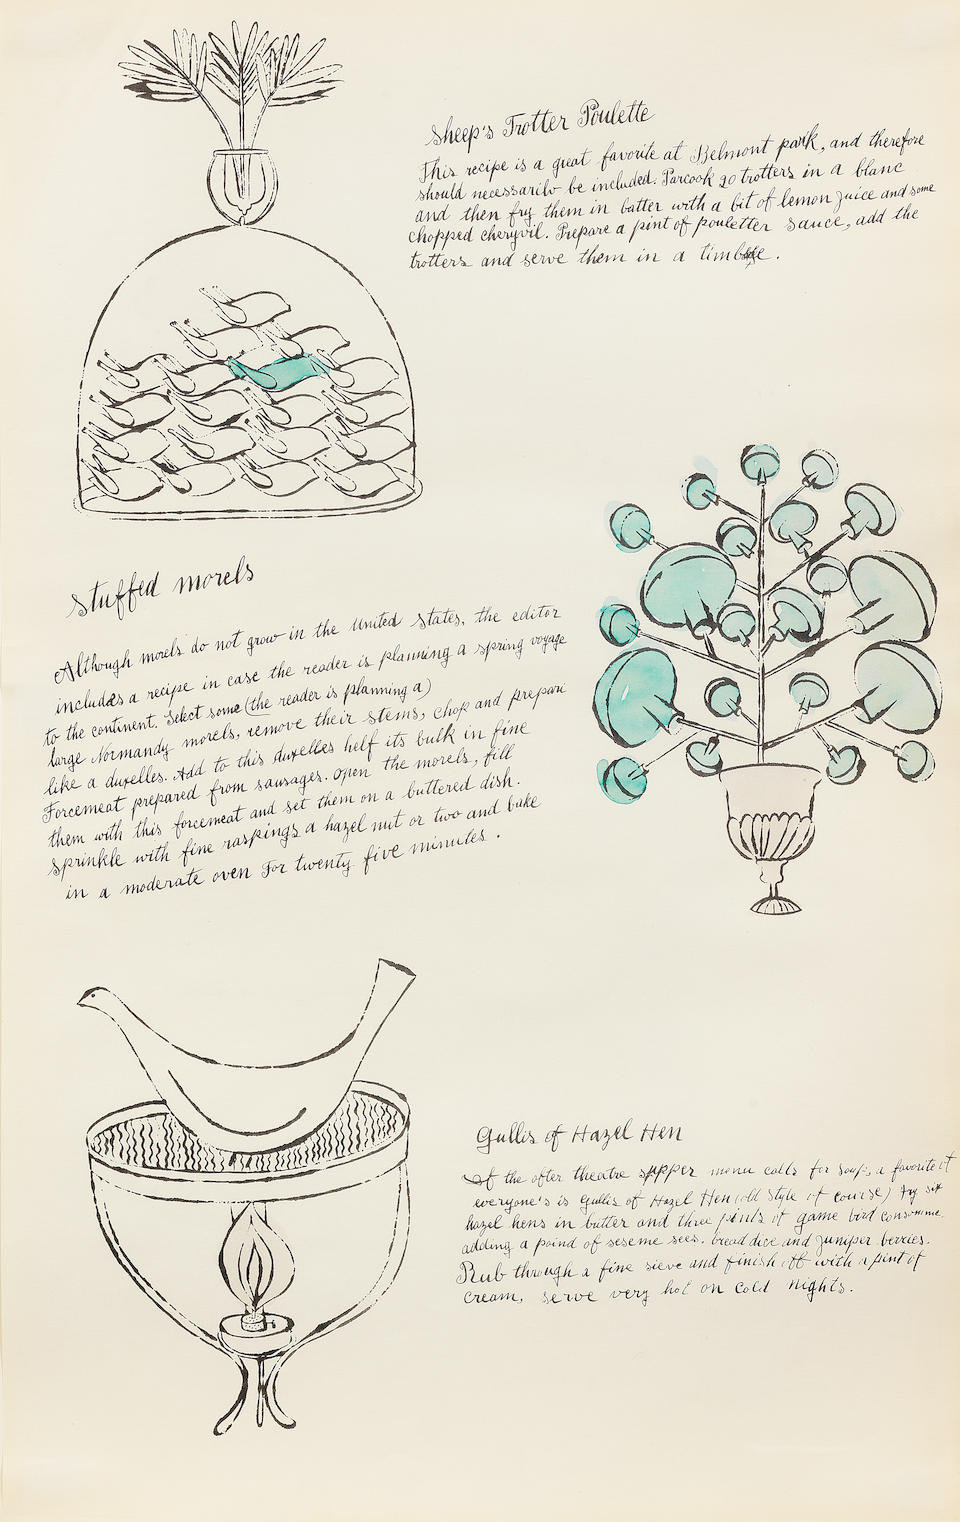 Andy Warhol (American, 1928-1987) Wild Raspberries The complete set of eighteen offset lithographs, of which seventeen with hand-colouring, one printed on a double sheet, in-texte, with recipes by Suzie Frankfurt, 1959, on laid paper, with title page, from the edition of unknown size, the full sheets, colours fresh and bright, in good conditionSheets 432 x 276mm. (17 x 10 7/8in.); the double sheet 435 x 556mm. (17 x 21 7/8in.)